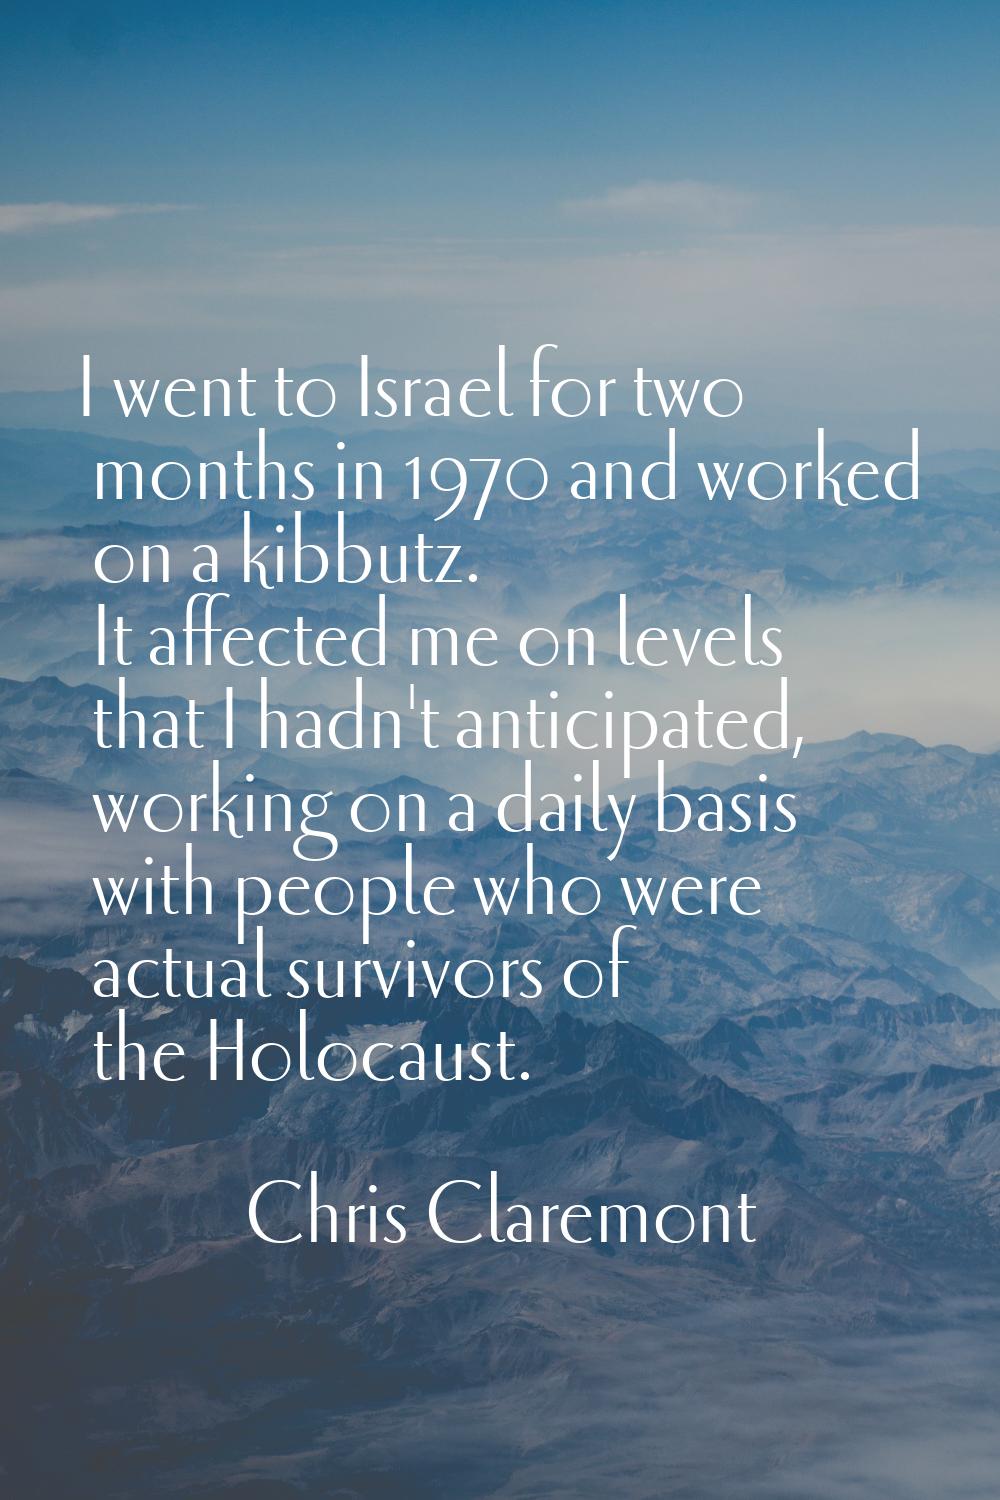 I went to Israel for two months in 1970 and worked on a kibbutz. It affected me on levels that I ha